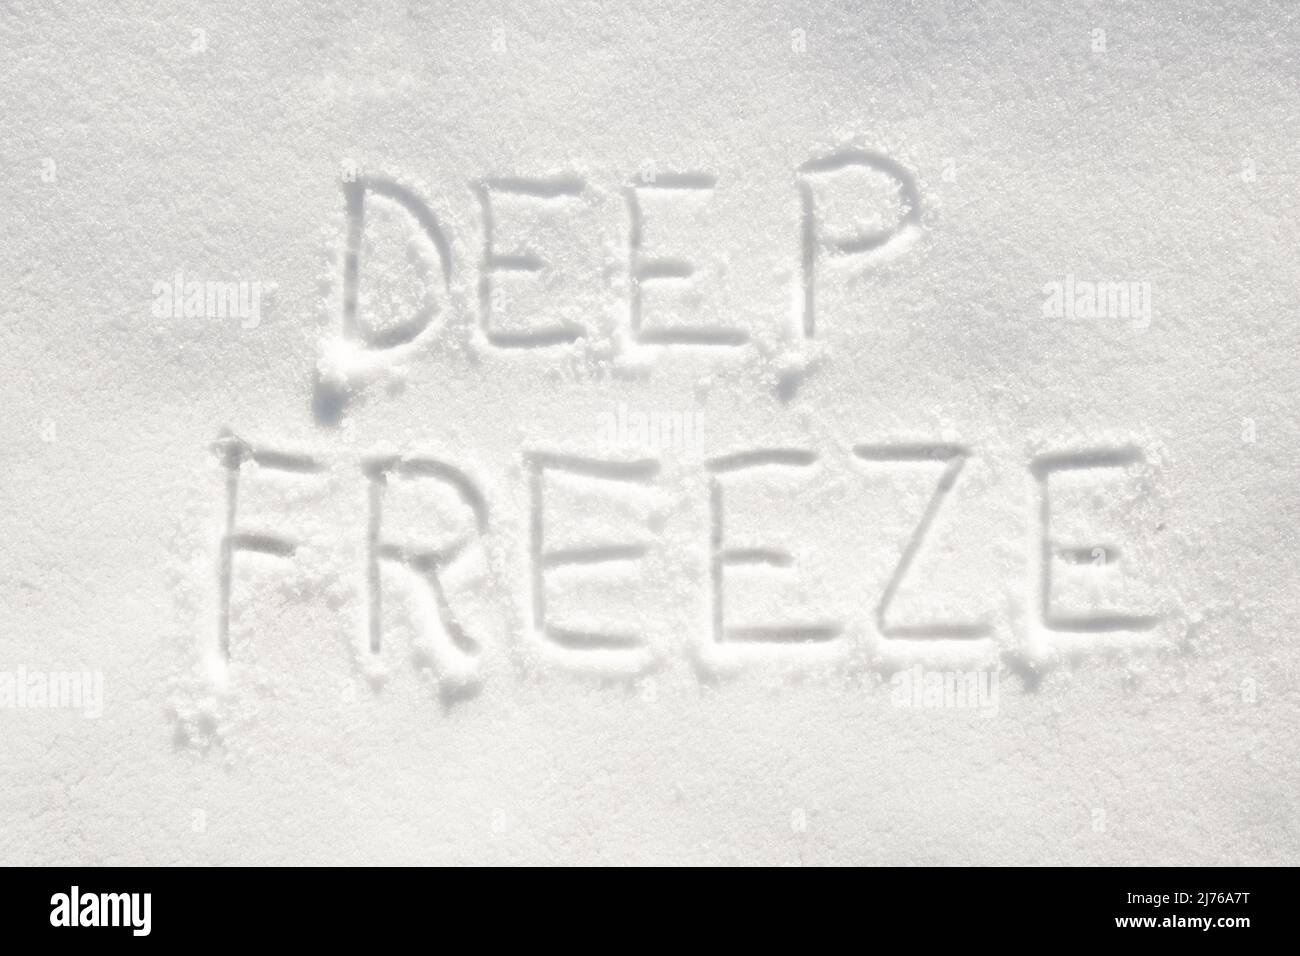 Text 'deep freeze' written in snow; concept of very cold weather arriving Stock Photo